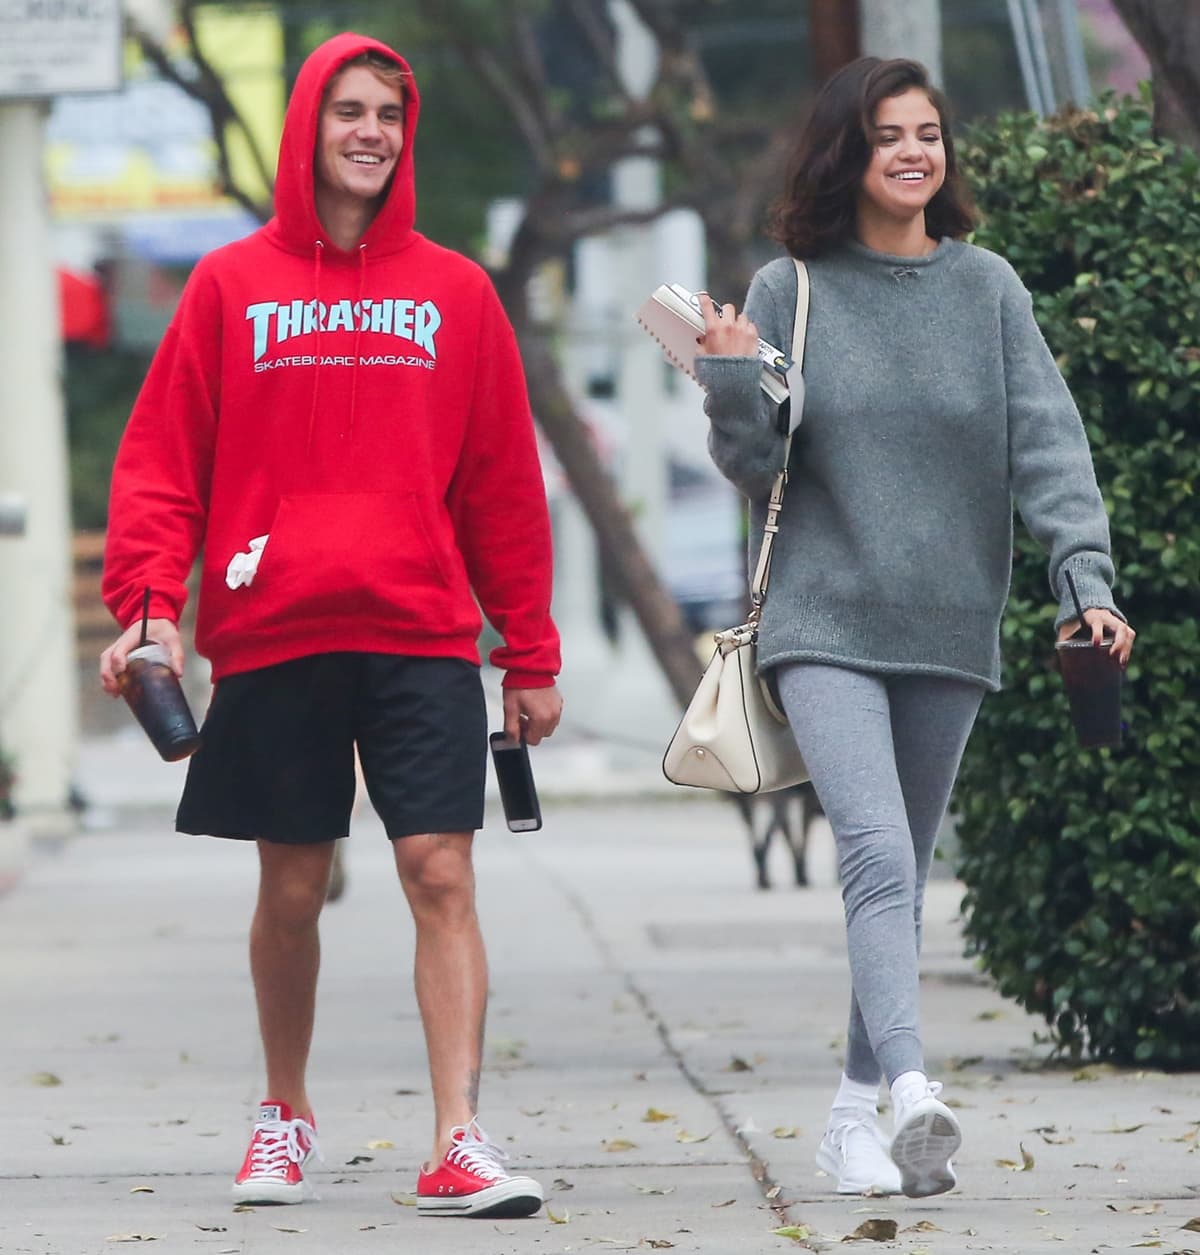 When she's not wearing high heels, Justin Bieber looks about the same height as Selena Gomez